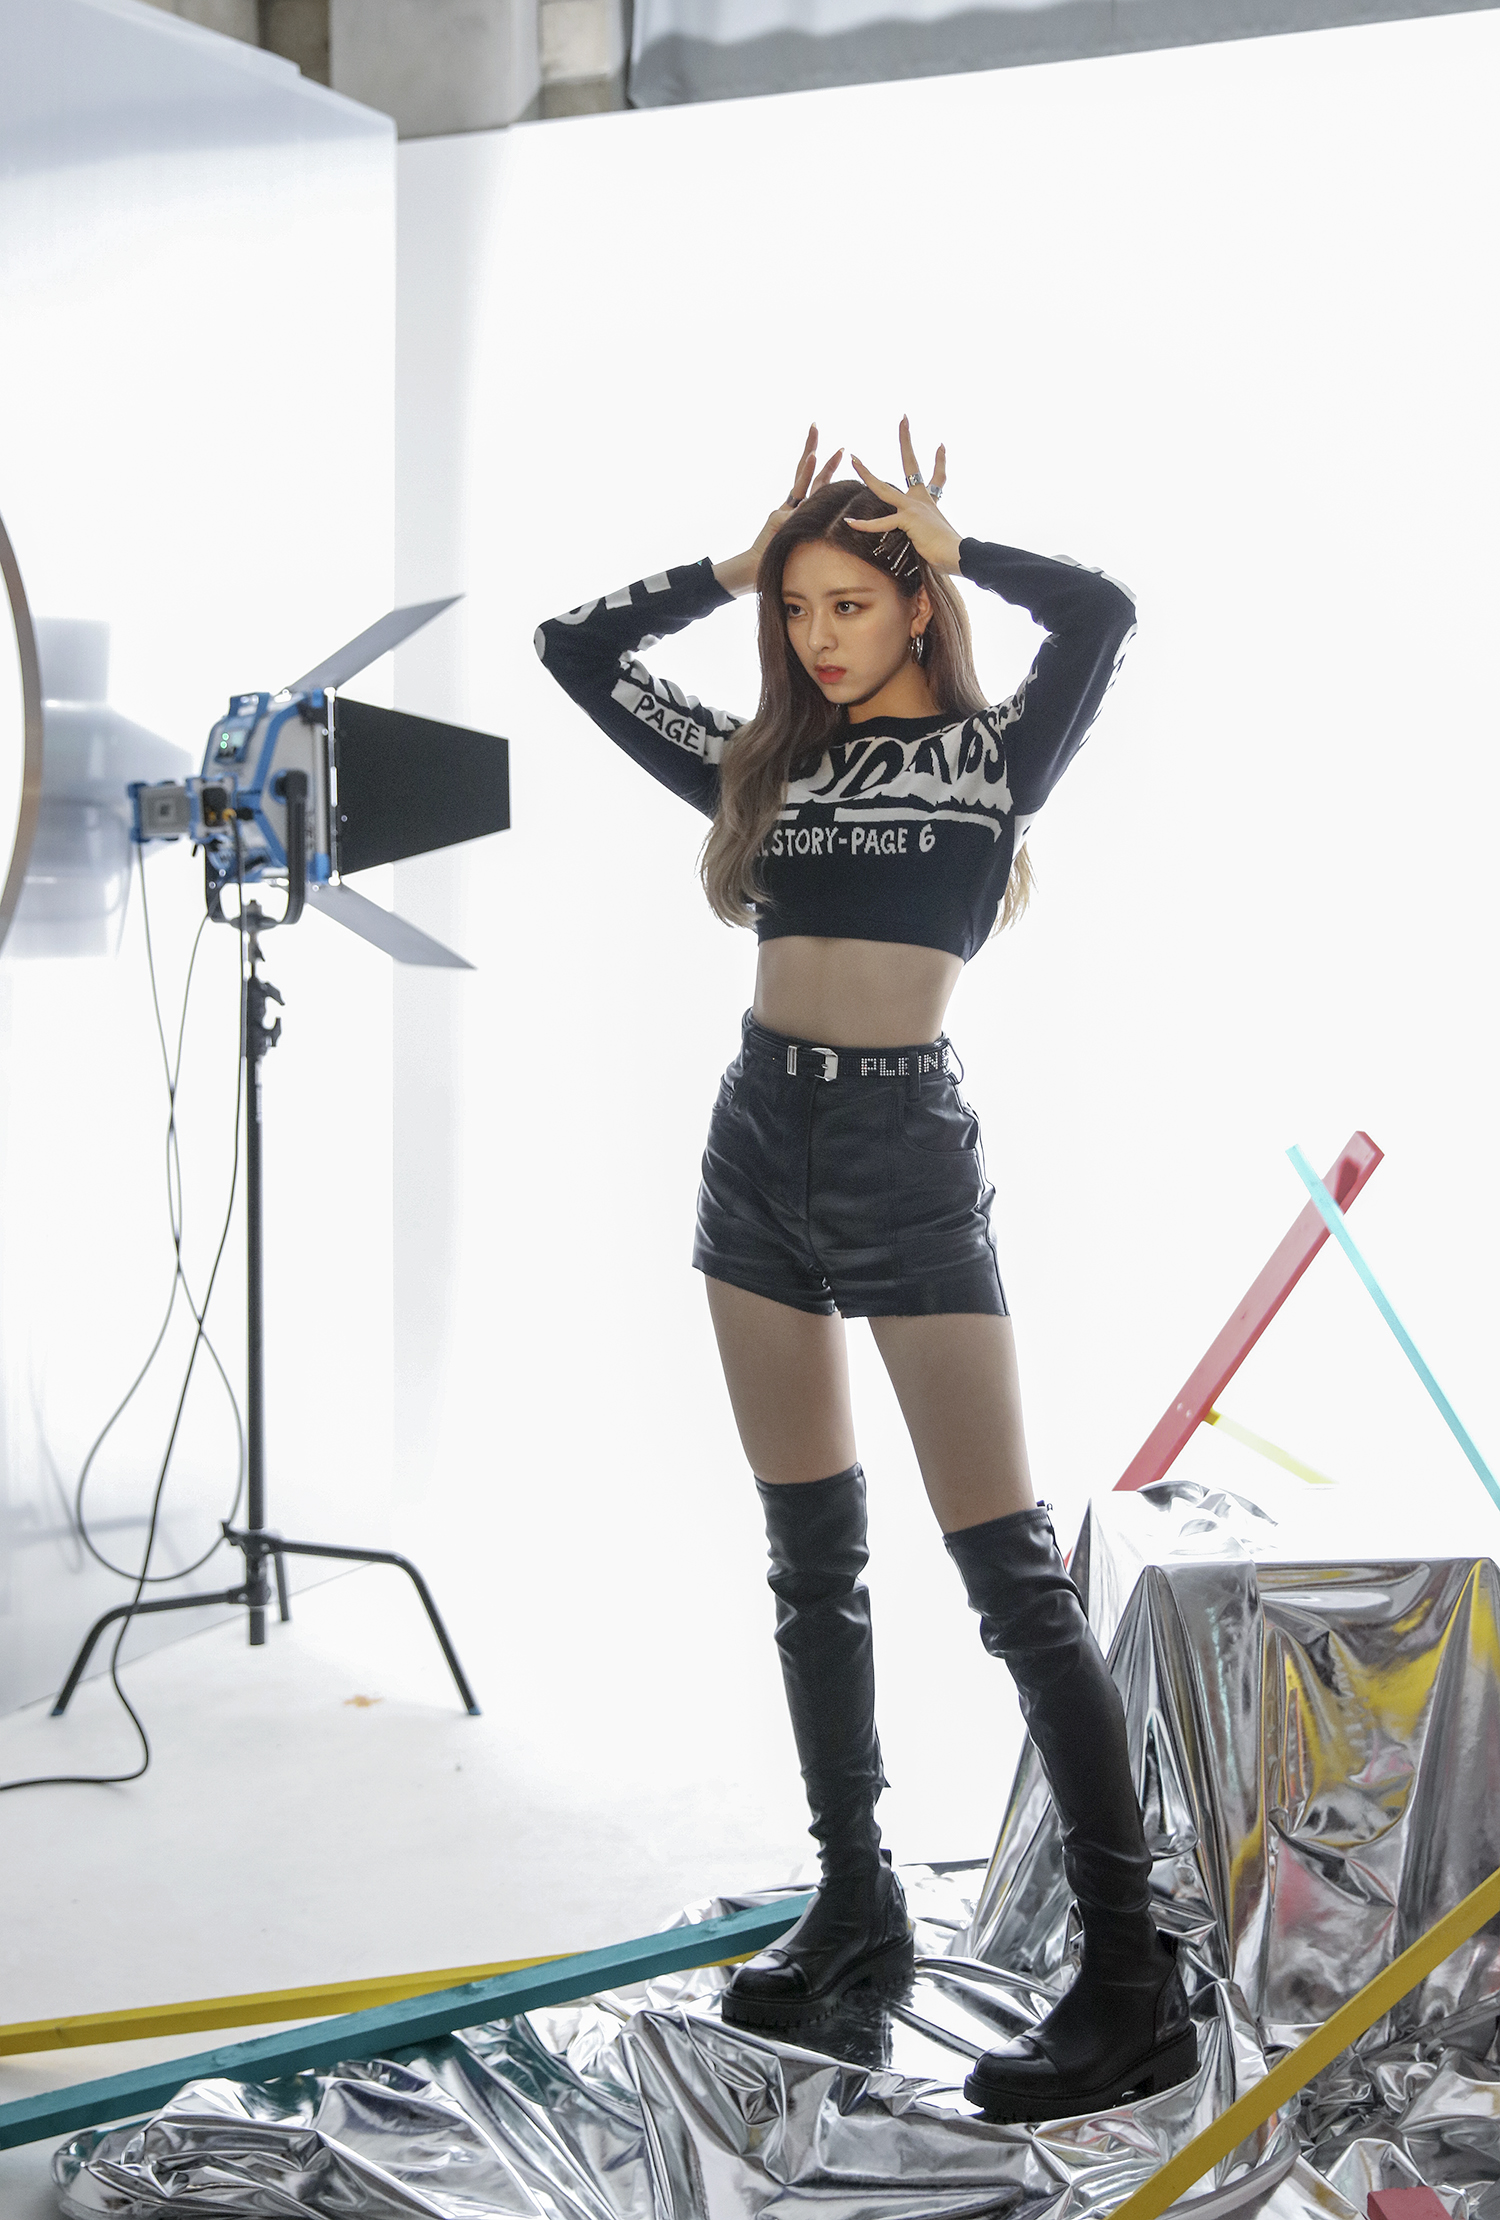 ITZY (ITZY) has produced the best results by demonstrating super-intensive mode on the set of Jacket on the new album.JYP Entertainment has opened Jacket Behind Cuts for ITZY Yezi, Lia, Ryu Jin, Chaeryeong and Yuna, which made their comeback with their new song WANNABE (Wannabe) on the last 9th day.The photos released today (11th) revealed the enthusiasm and efforts of the five members to improve the completeness of the content.ITZY is professional in shooting and released Pro Idolmi.Especially, the ITZY charismatic eyes that fully implemented the New album concept were vividly impressed.Leaders Yezi and Ryu Jin each perfected their extraordinary blonde ponytails and blue knife-footed hair and spewed out an extraordinary cool force.Lia and Chaeryeong emanated the beauty and charm reminiscent of the protagonist in the teen movie and gave a dazzling eye contact.The youngest Yuna, who boasts a cool proportion, posed for an ITZY signature and showed off her unique aura.As such, all members showed off their excellent concept digestion ability and completed the best contents.ITZY, which has been hot for the first comeback in 2020, has achieved three consecutive hits and is speeding up the box office.The new song wannabe is on the top of the real-time charts of four music sites on the day of release (9th day), and continues to gust on the third day of release, including the top of the Genie Music, Bucks and Soribada charts as of 8 am on the 11th.The number of music video YouTube views has surpassed 10 million at 1:50 pm on October 10, and has surpassed 20 million views at 2:50 am on November 11.At noon on the 10th, he was the number one YouTube music video trending in 14 regions around the world.It has boasted remarkable ripple power in Korea, Argentina, Bolivia, Hong Kong, Indonesia, Malaysia, Taiwan, Brazil, the United Arab Emirates, Chile, the Philippines, Paraguay and Uruguay.New album ITz ME (ITZY U.S.) also showed strong performance in record sales, as it ranked second on the record real-time chart on the record aggregation site Hanter chart and the Gaon chart retail album daily chart on the 10th.As a result, attention is focused on the solid action of ITZY, which has captured both the public and fandom and received the music industry.iMBC Kim Hye-young  Photo JYP Entertainment